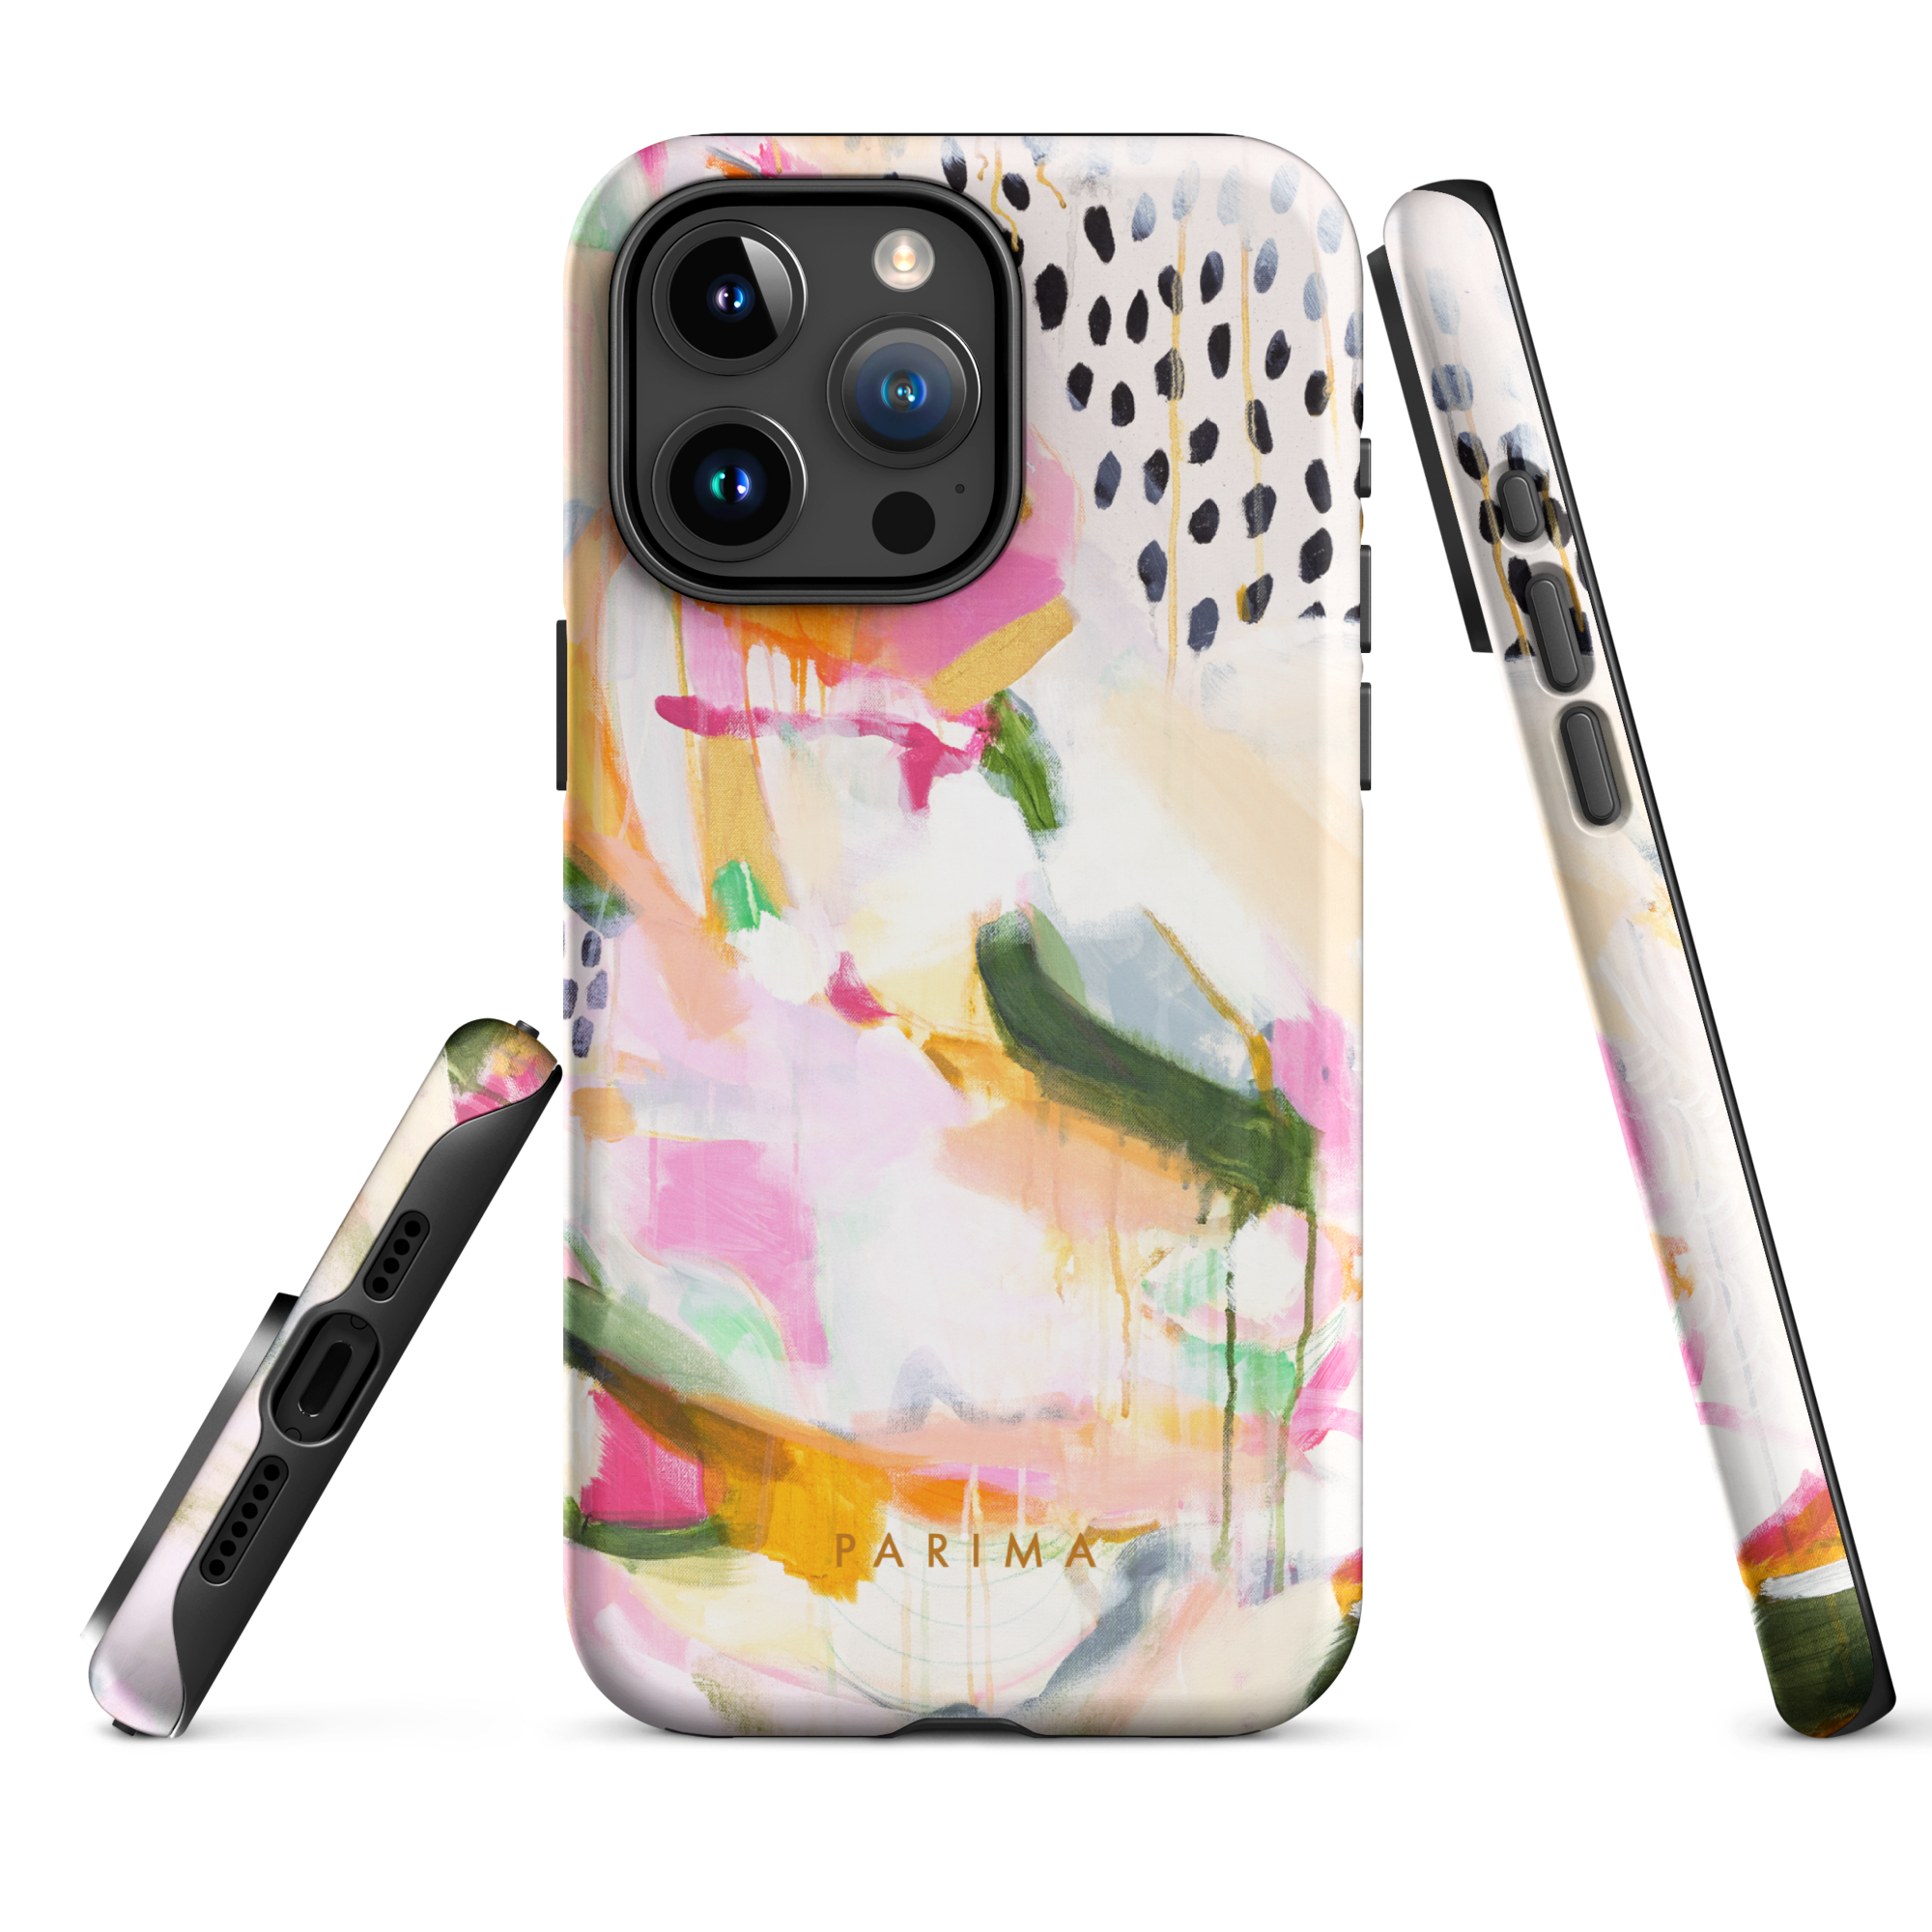 Adira, pink and green abstract art - iPhone 15 Pro Max tough case by Parima Studio